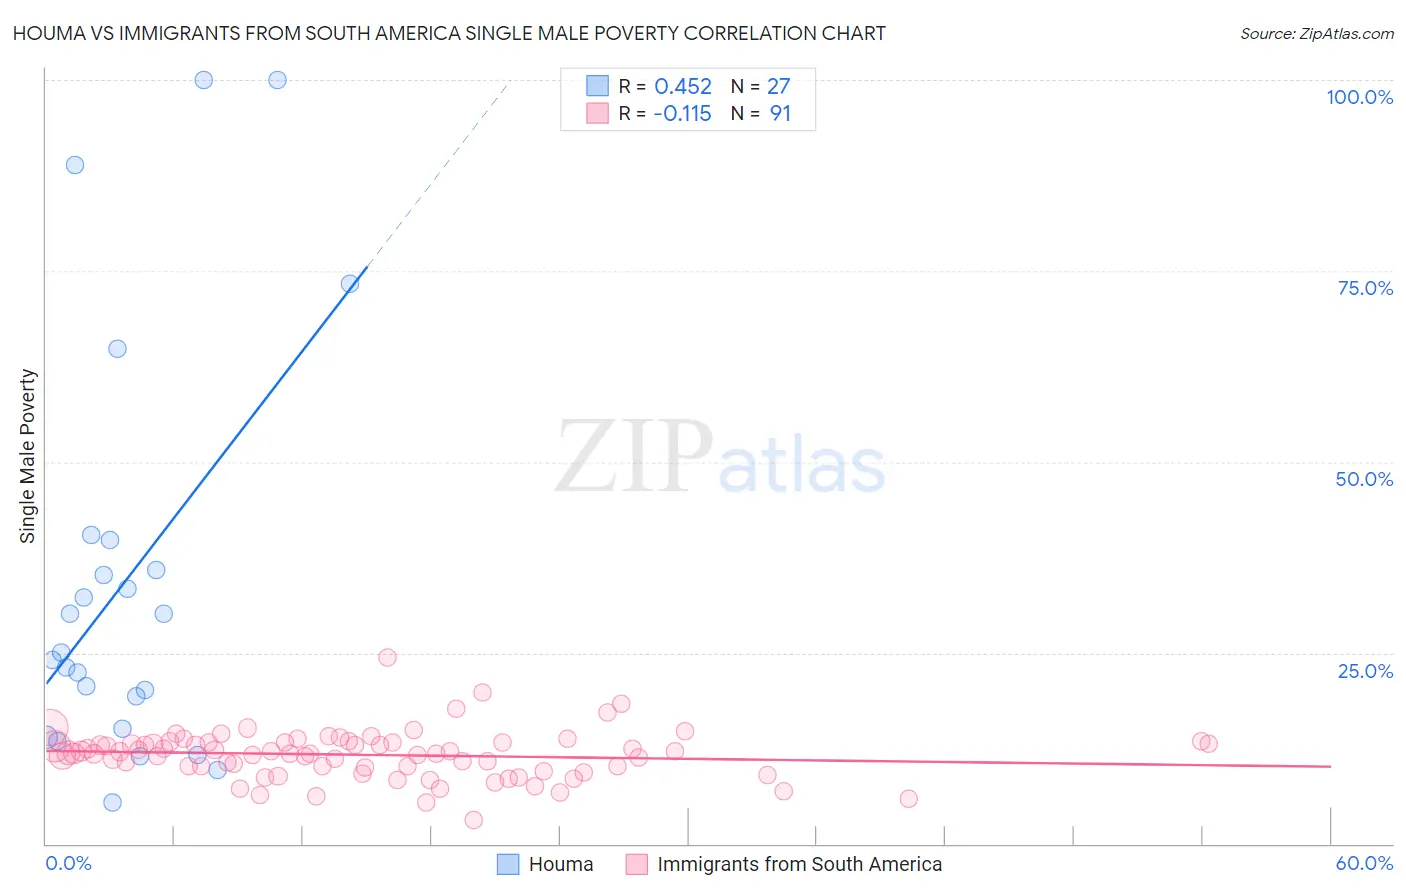 Houma vs Immigrants from South America Single Male Poverty